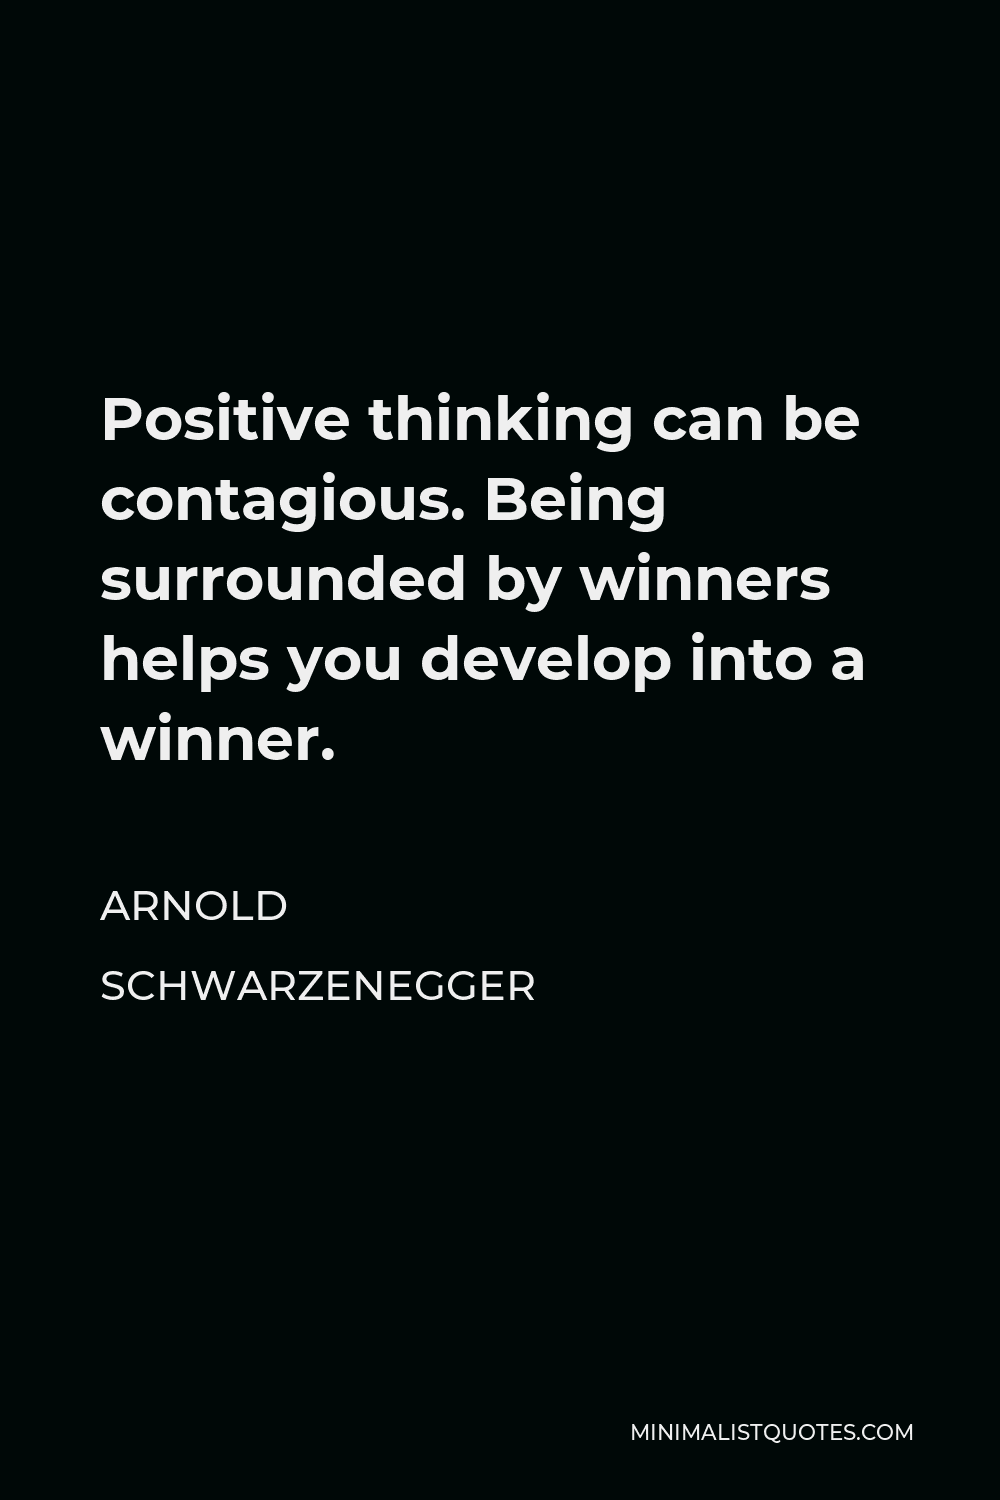 Arnold Schwarzenegger Quote - Positive thinking can be contagious. Being surrounded by winners helps you develop into a winner.